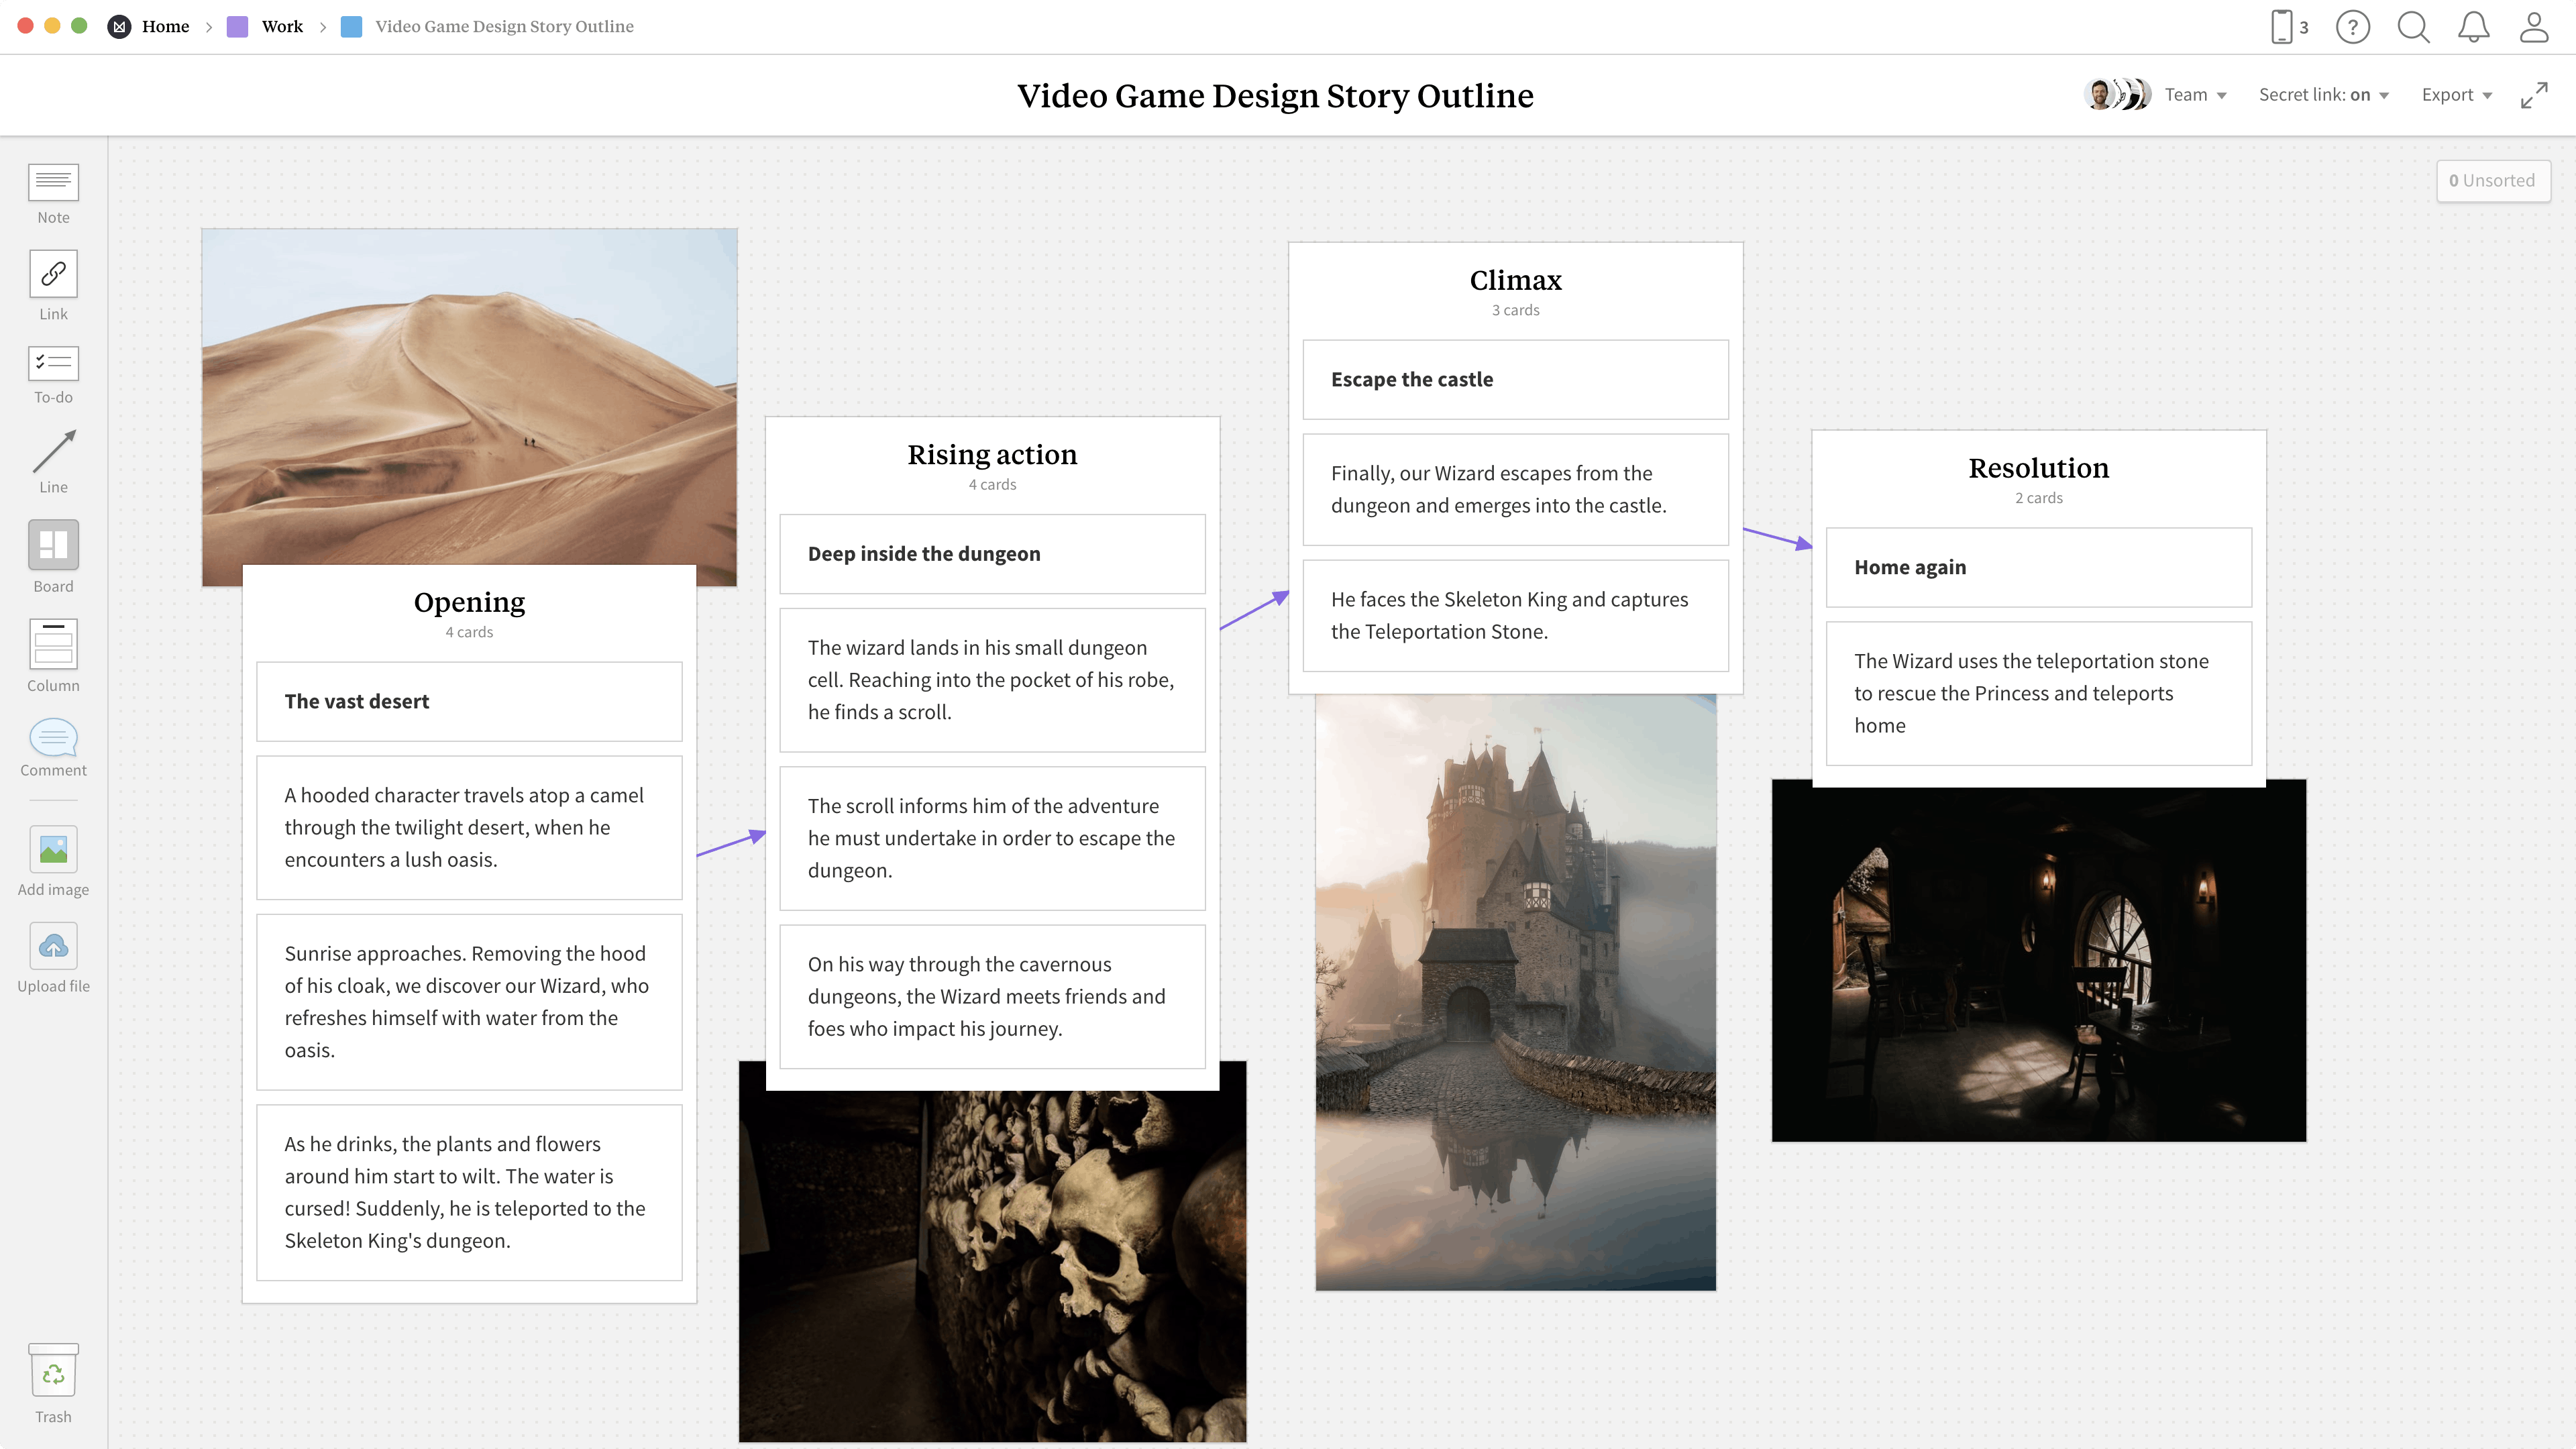 Game Design Story Outline Template, within the Milanote app